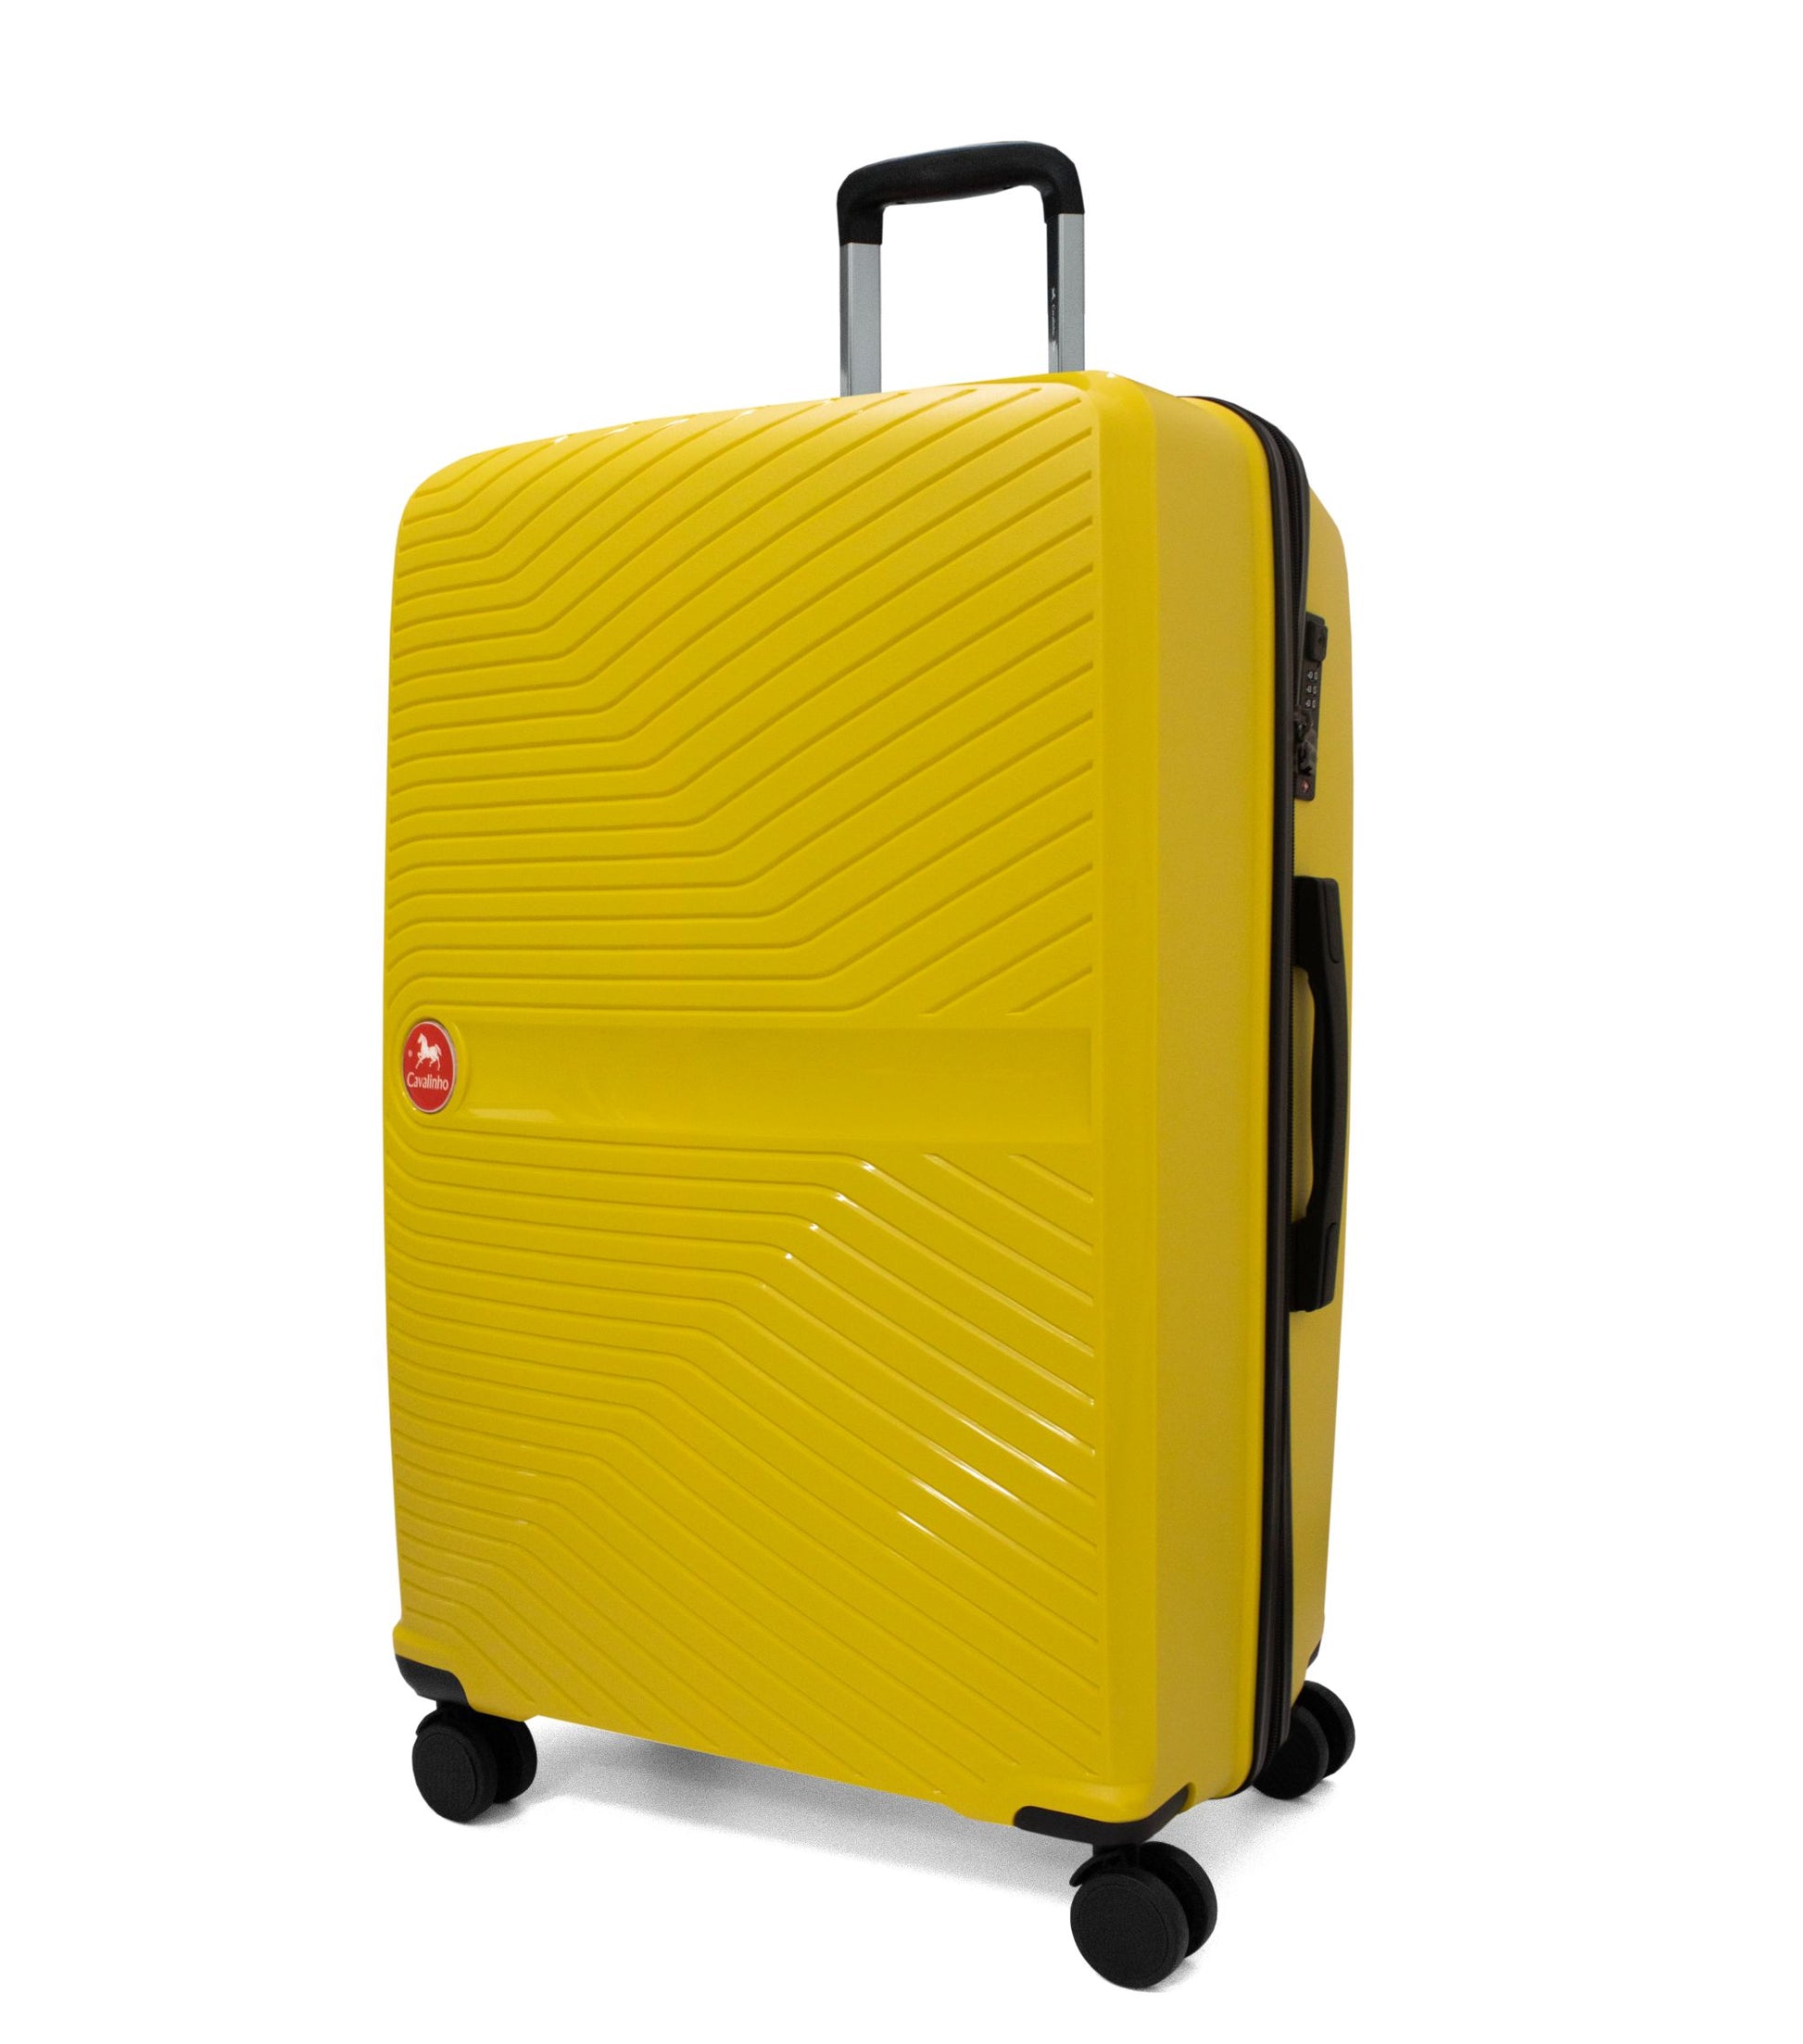 Cavalinho Colorful Check-in Hardside Luggage (28") - 28 inch Yellow - 68020004.08.28_2